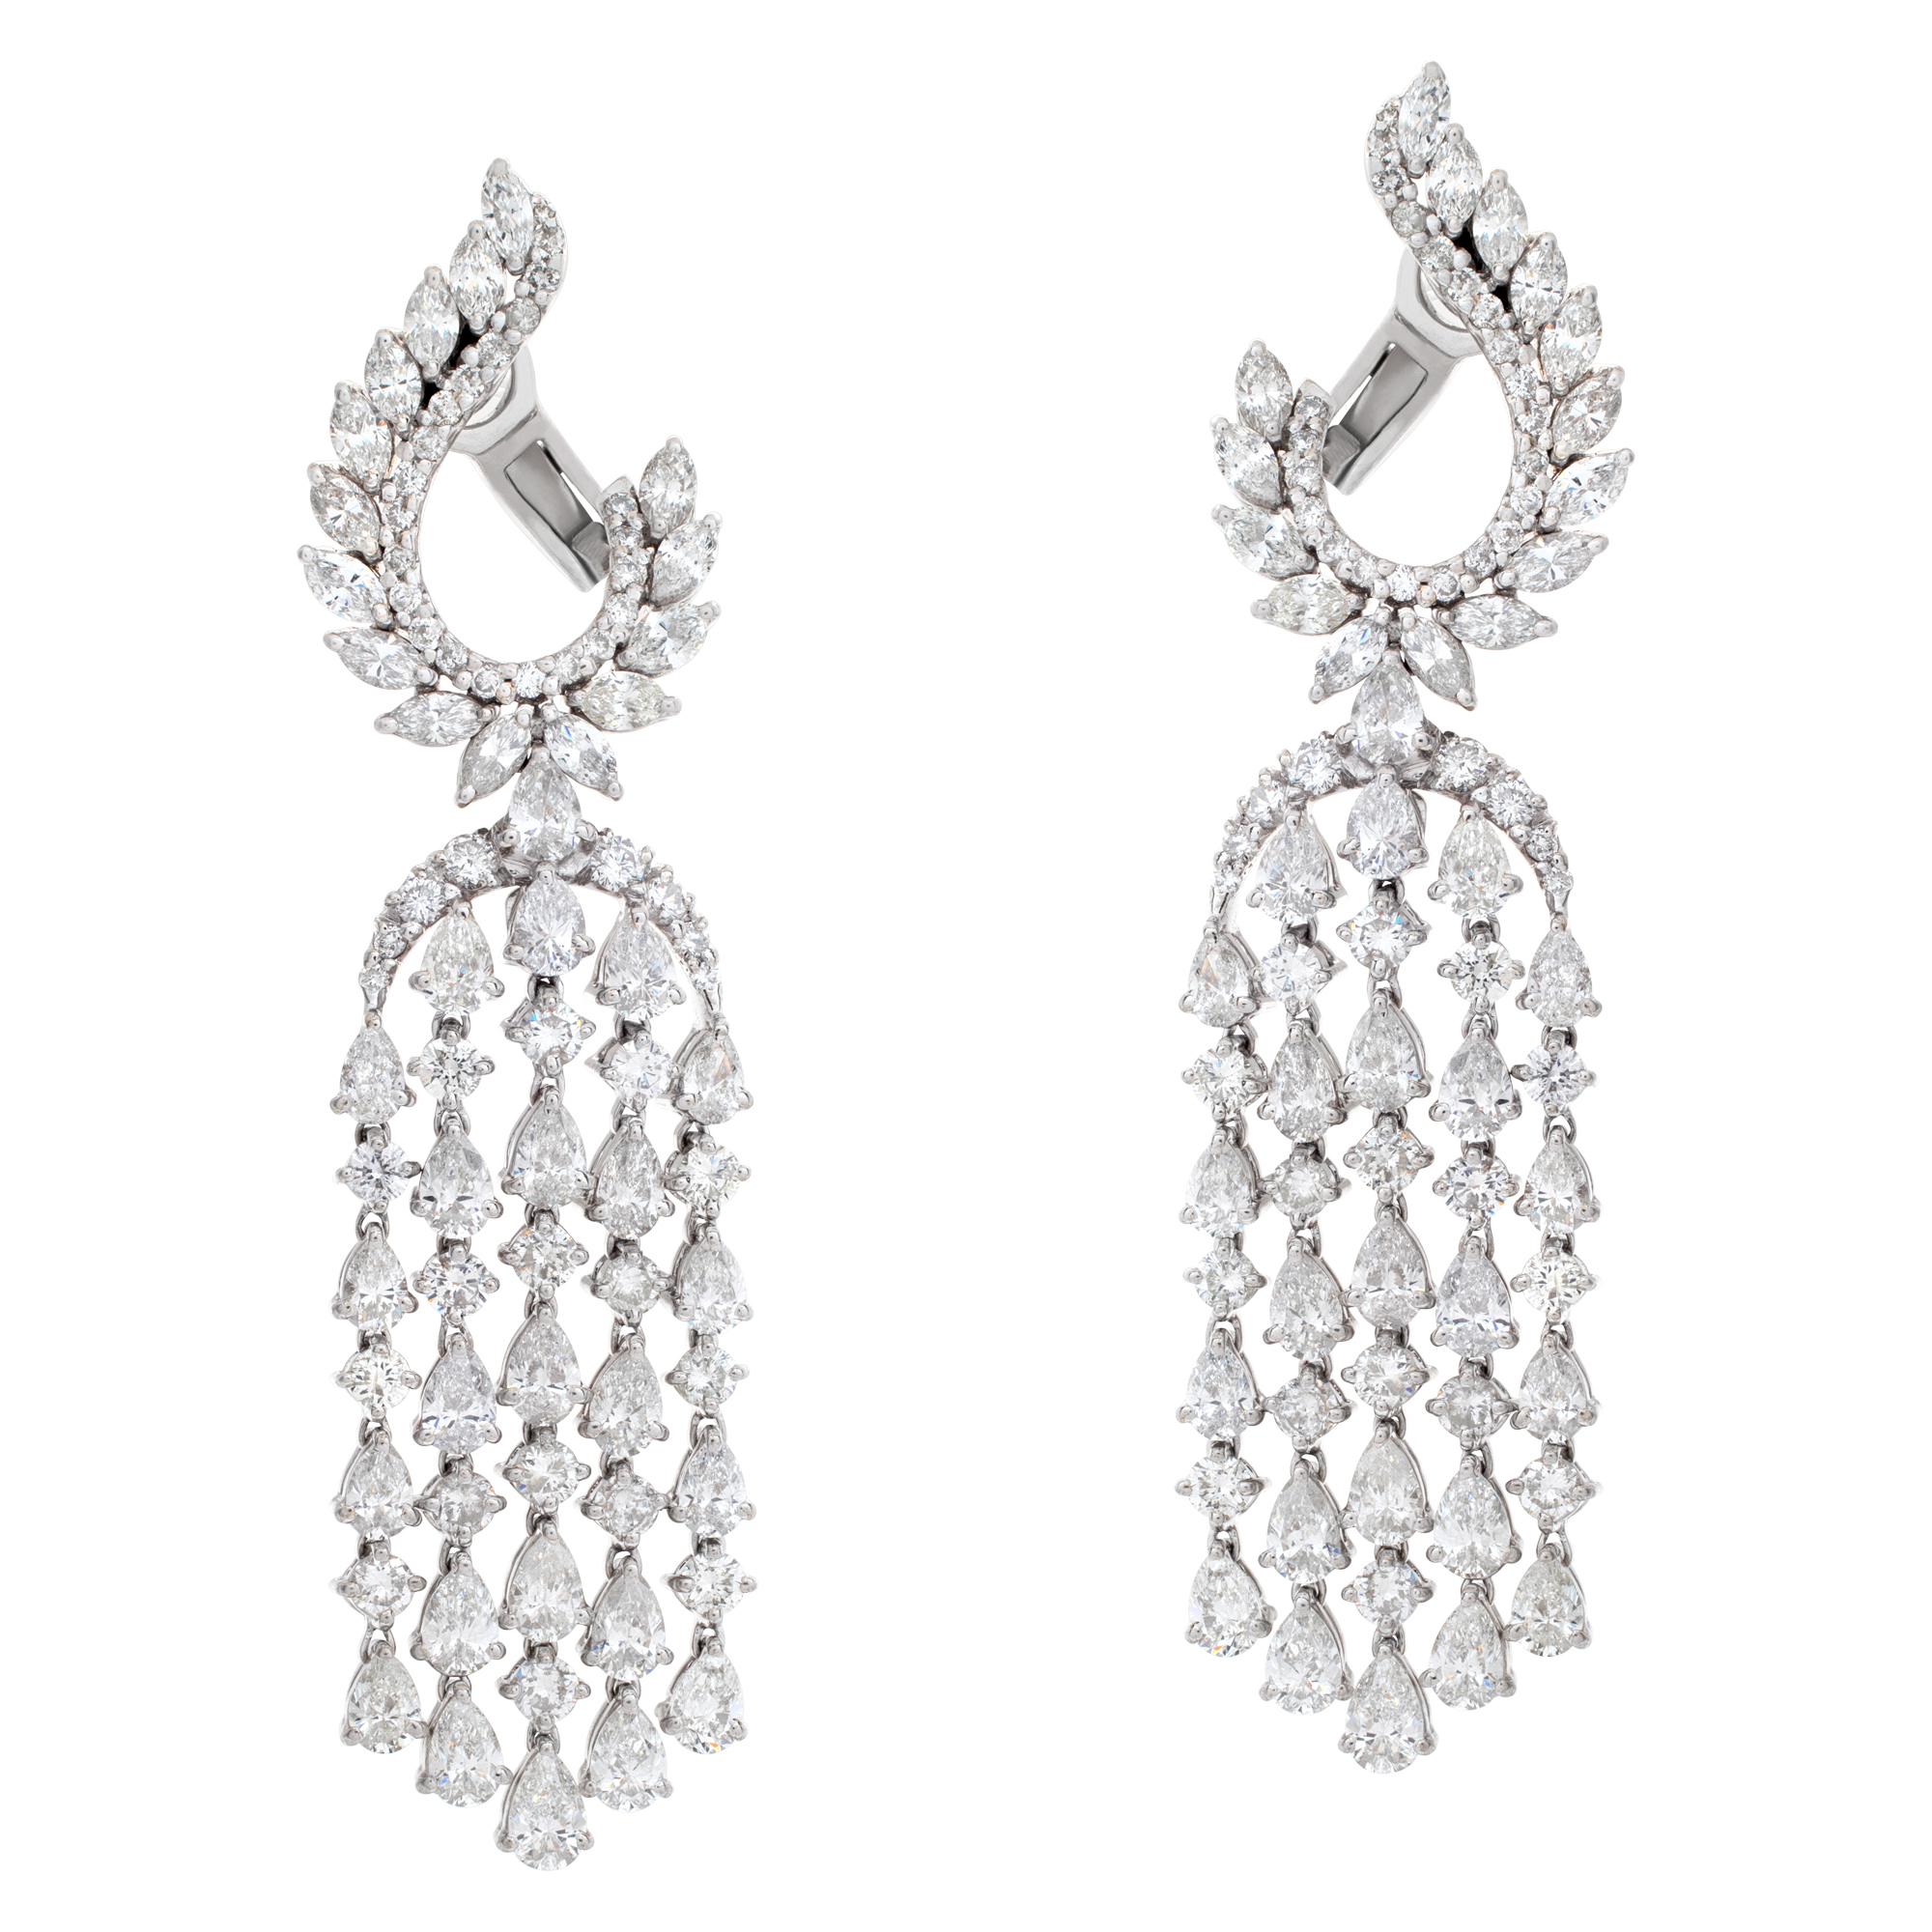 Stunning diamond chandelier earrings set in 18k white gold with approximately 13.40 carat marquise, princess, pear and round brilliant diamond cut shape image 1